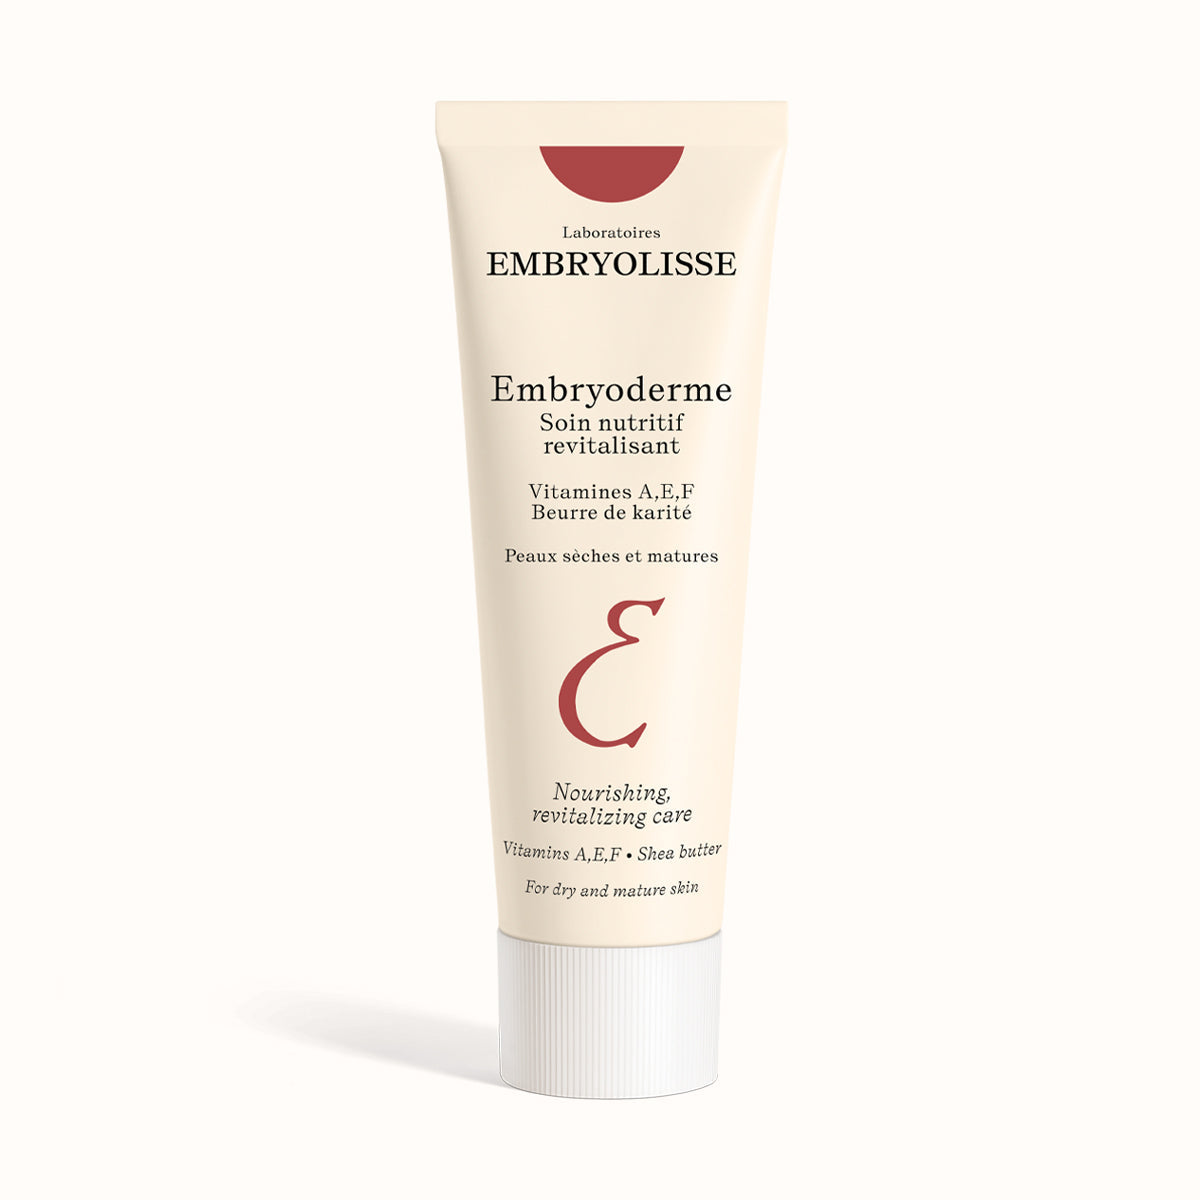 Embryoderme - Anti-Aging Face Cream - For Dry and Mature Skin